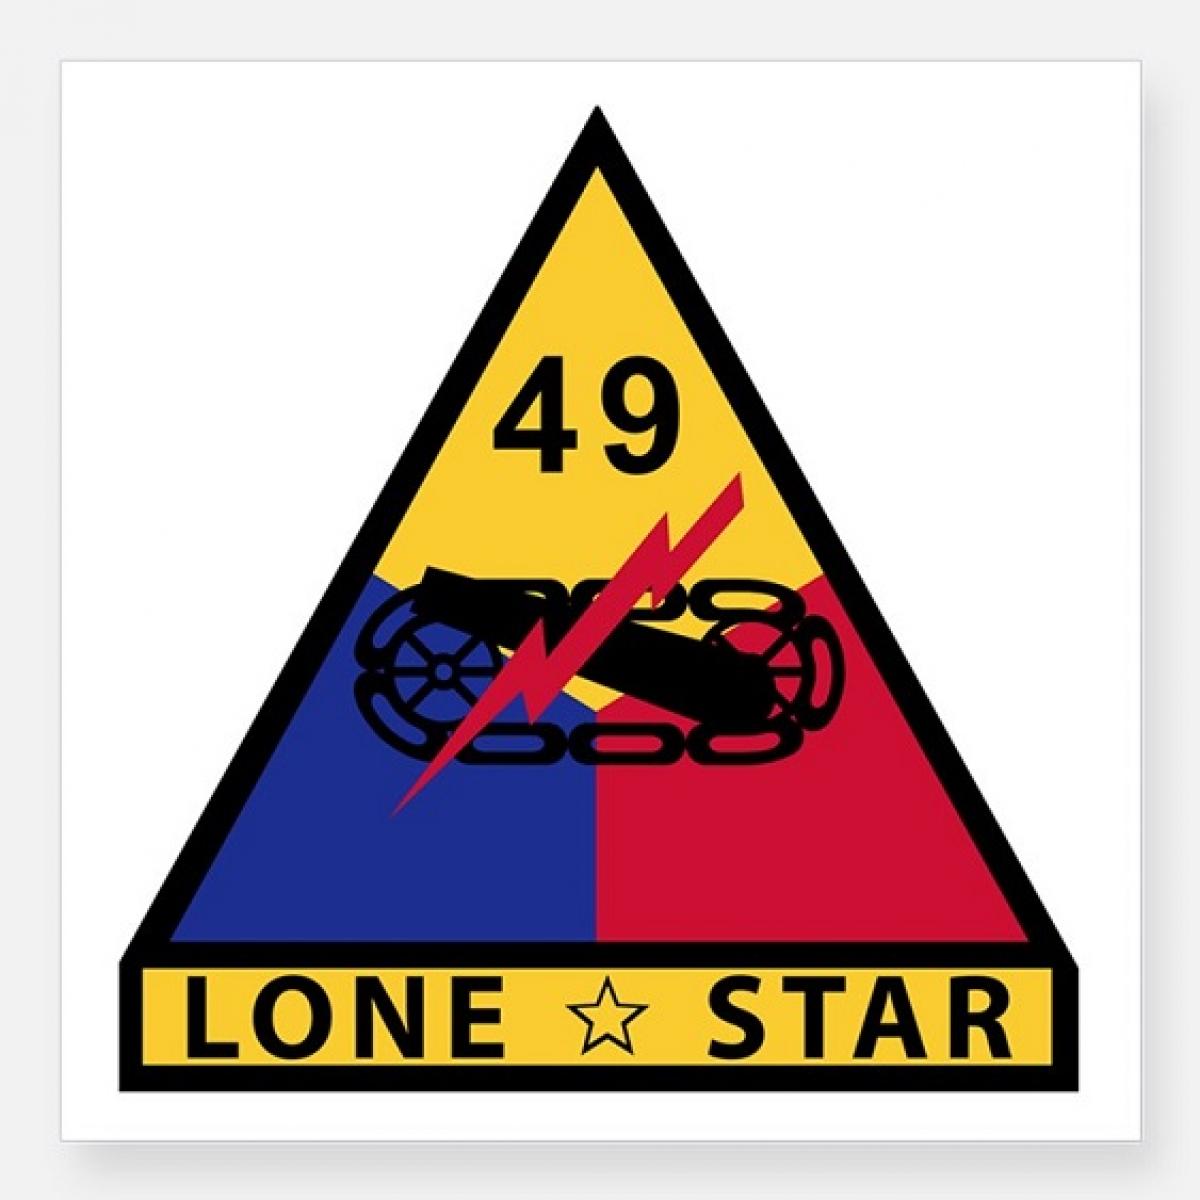 OK, Grove, Headstone Symbols and Meanings, U. S. Army 49th Armored Division (Lone Star)